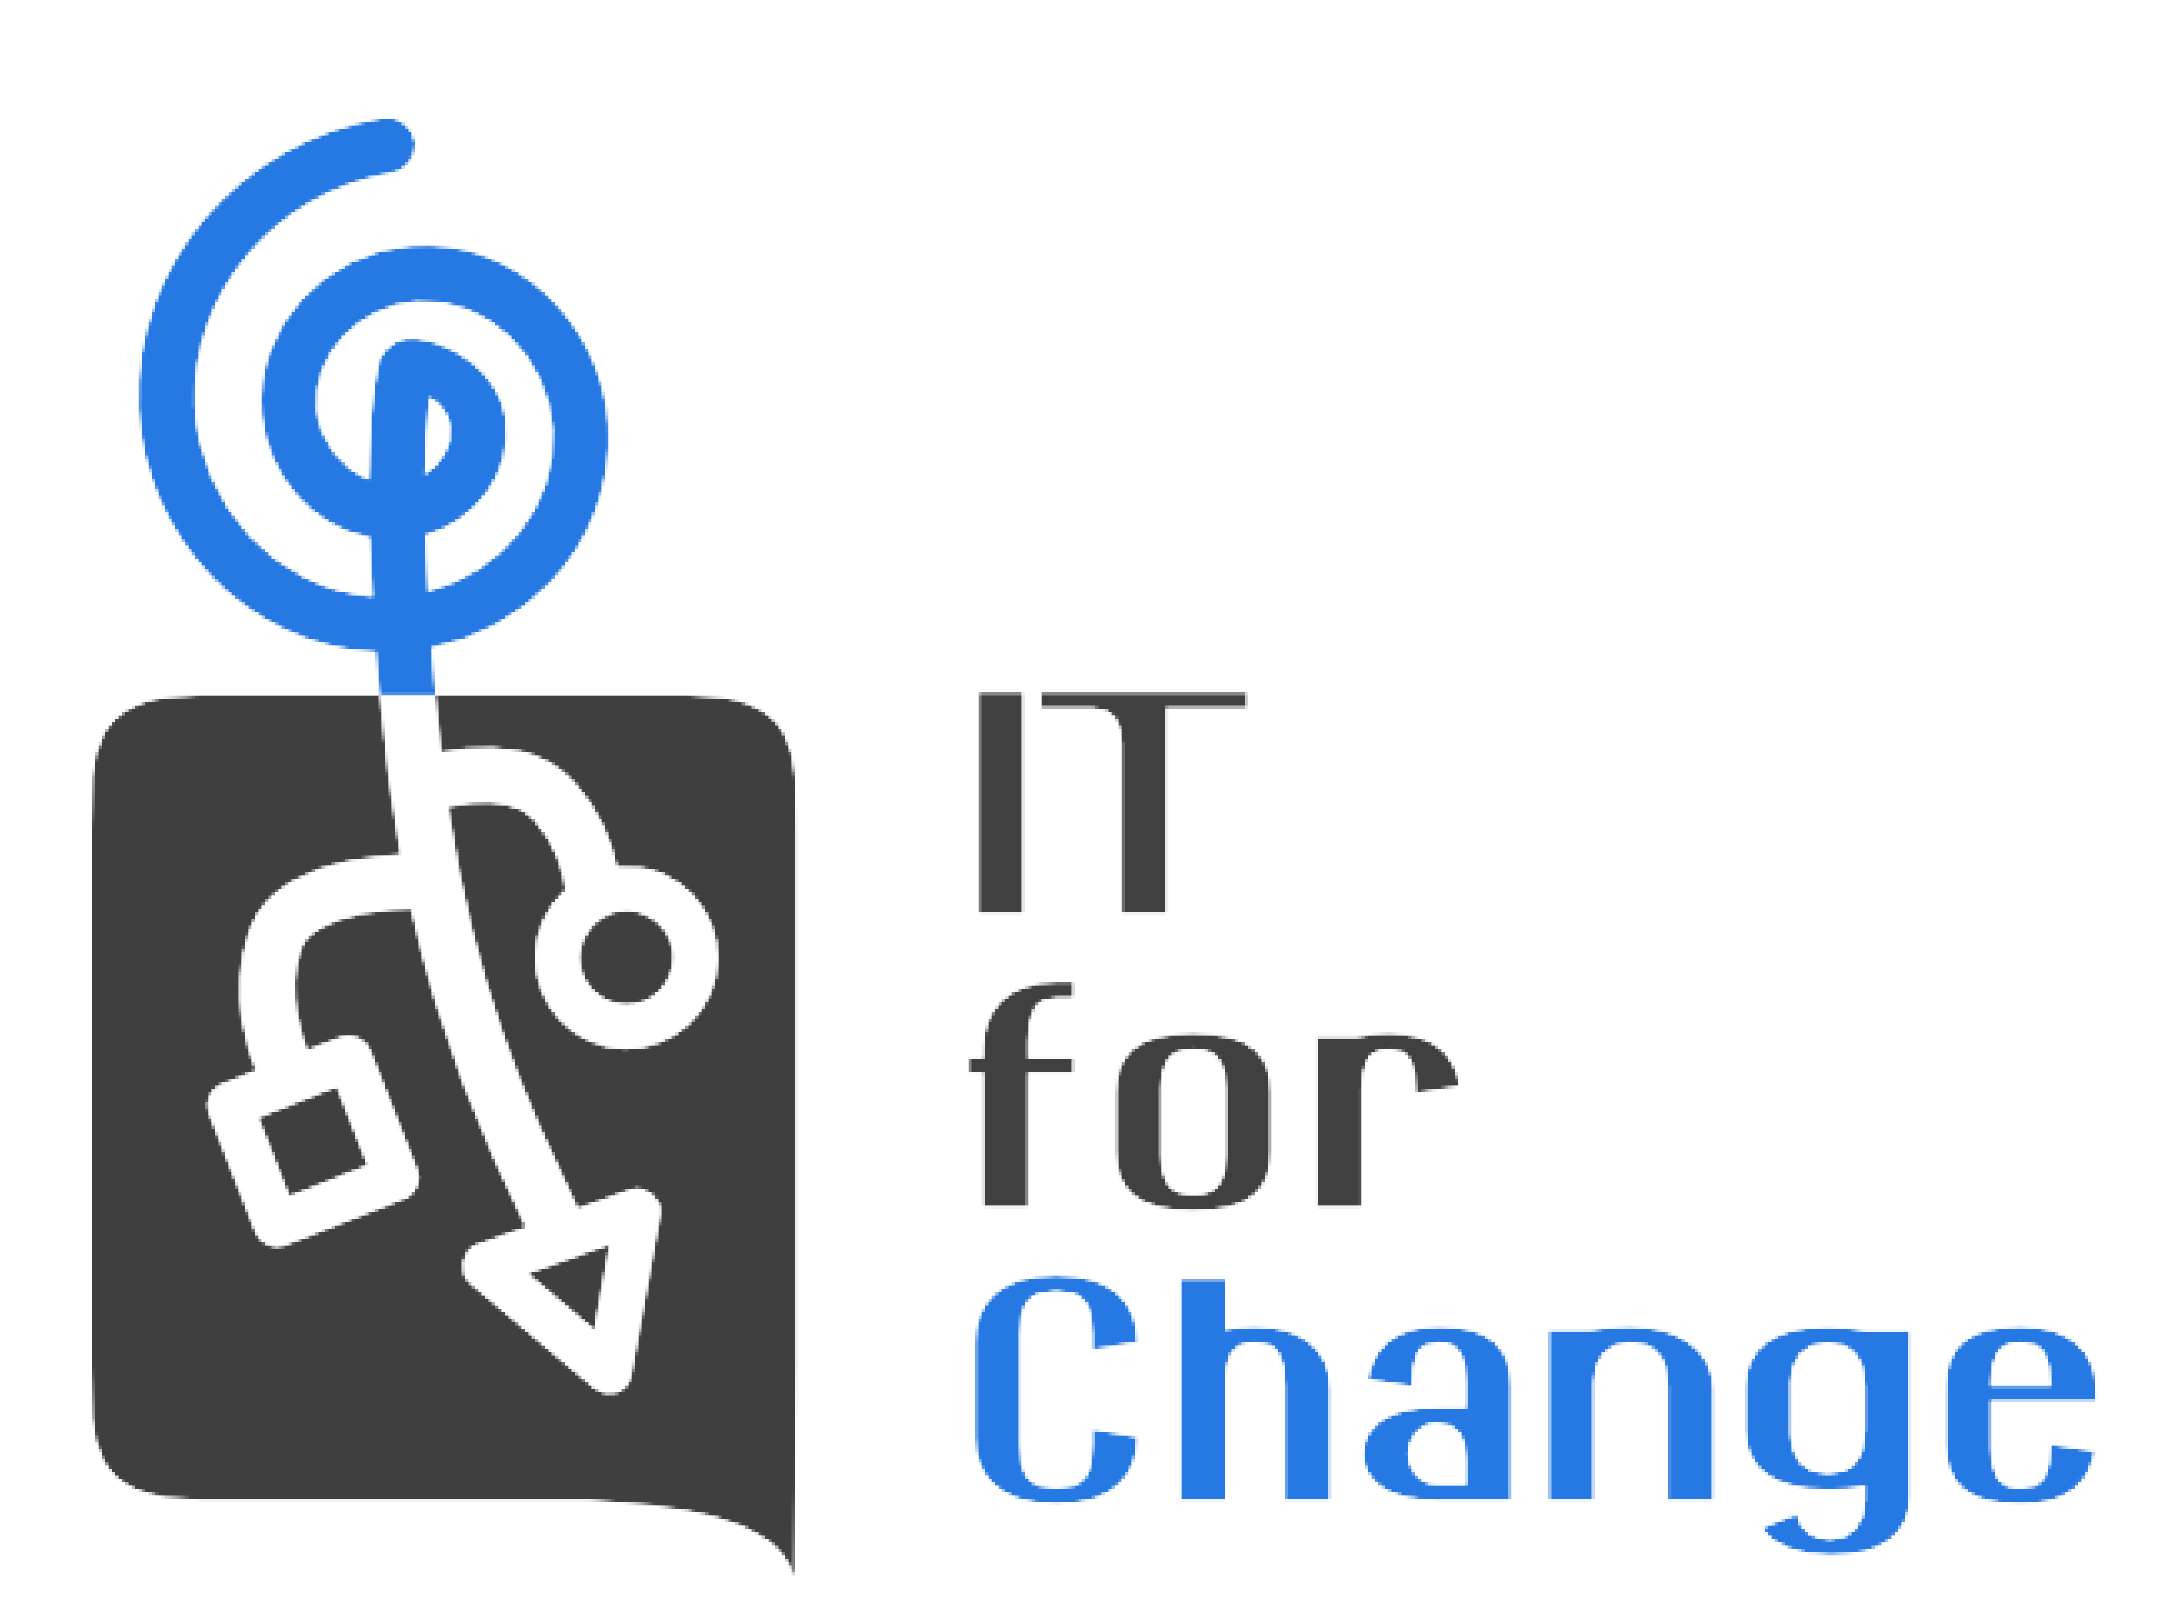 IT for Change